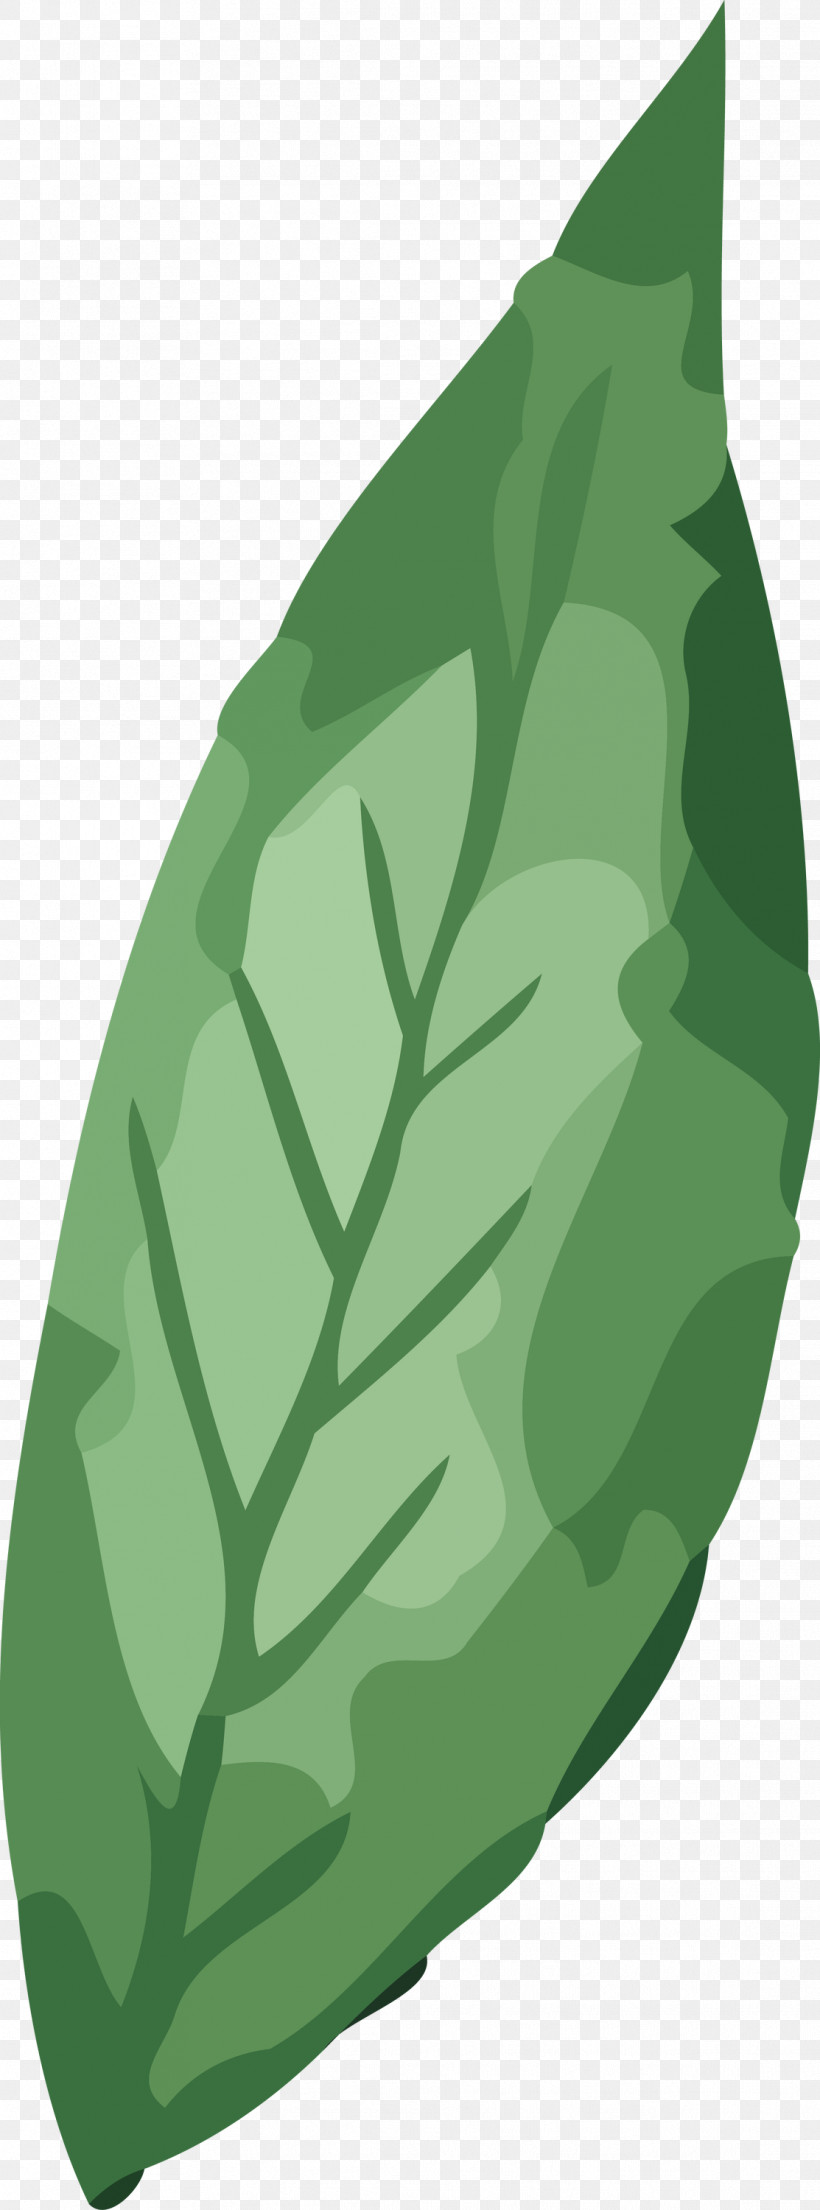 Leaf Vegetable Green Plant Structure Science, PNG, 1113x3000px, Leaf, Biology, Green, Plant Structure, Plants Download Free